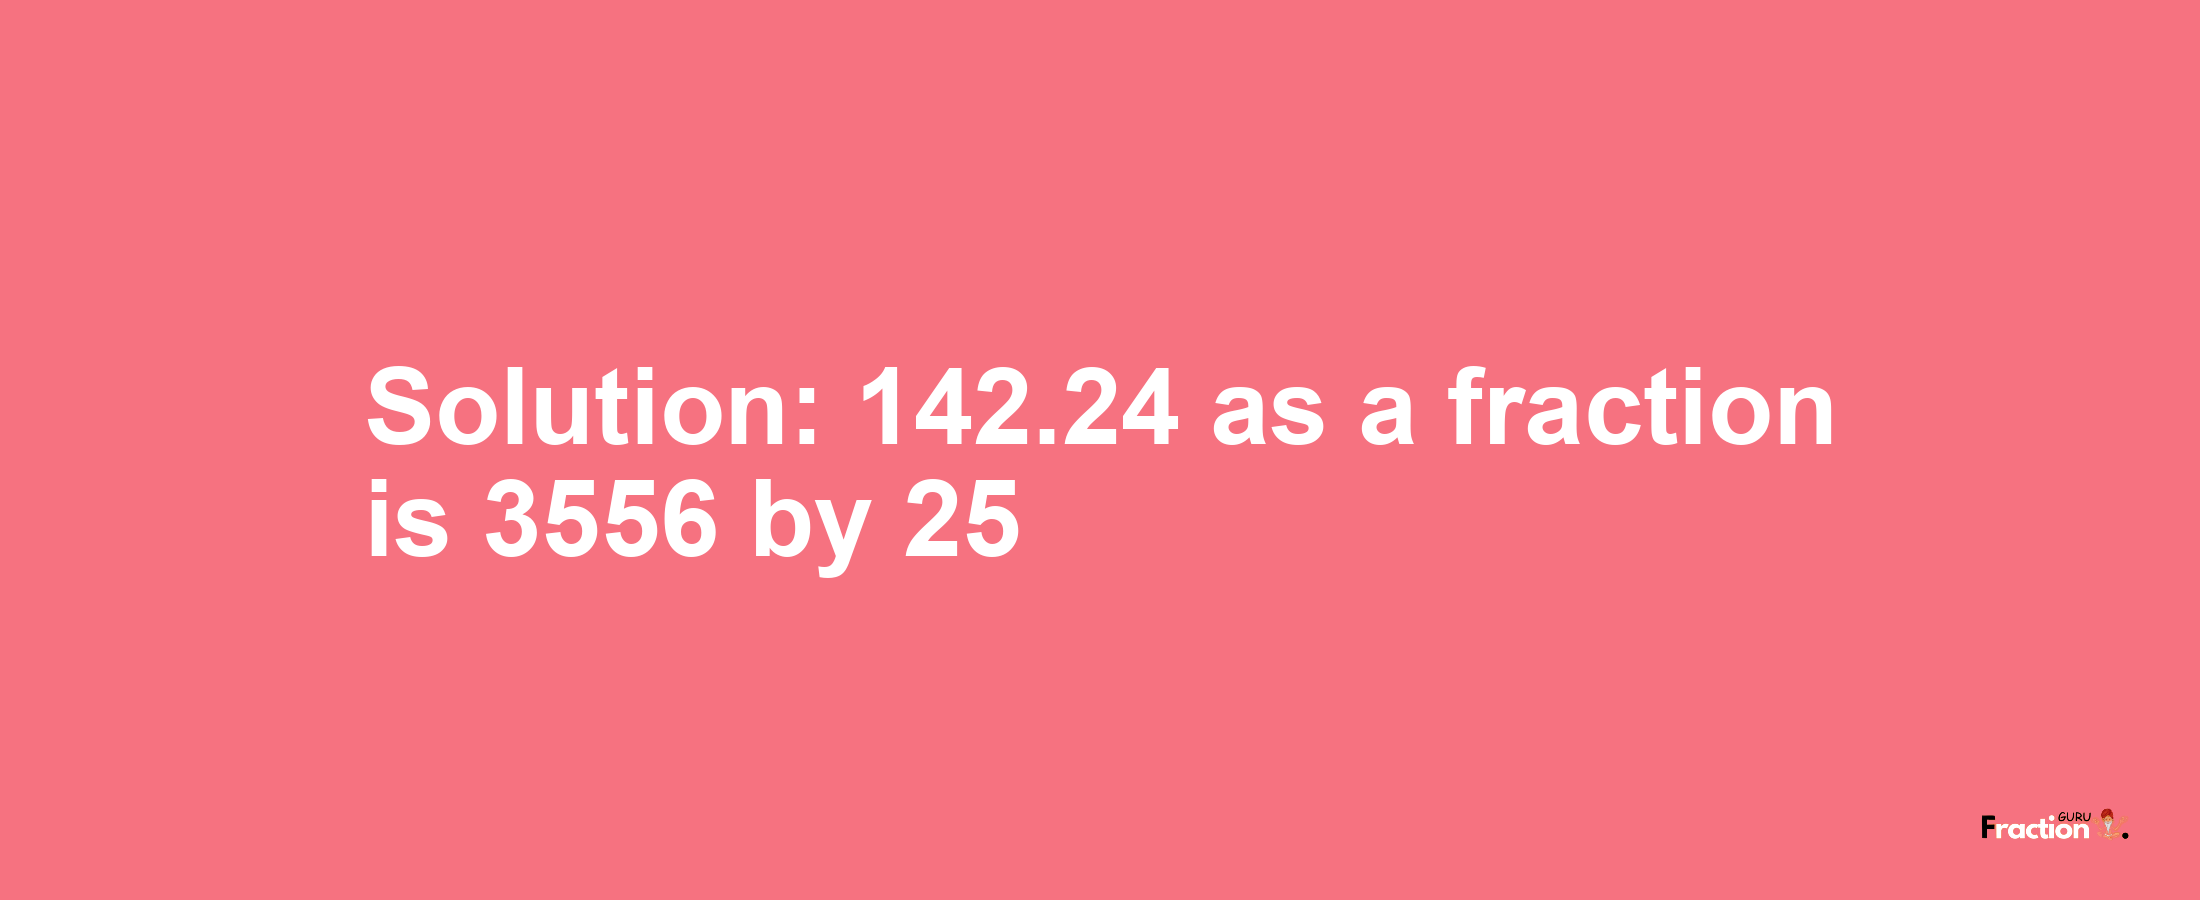 Solution:142.24 as a fraction is 3556/25